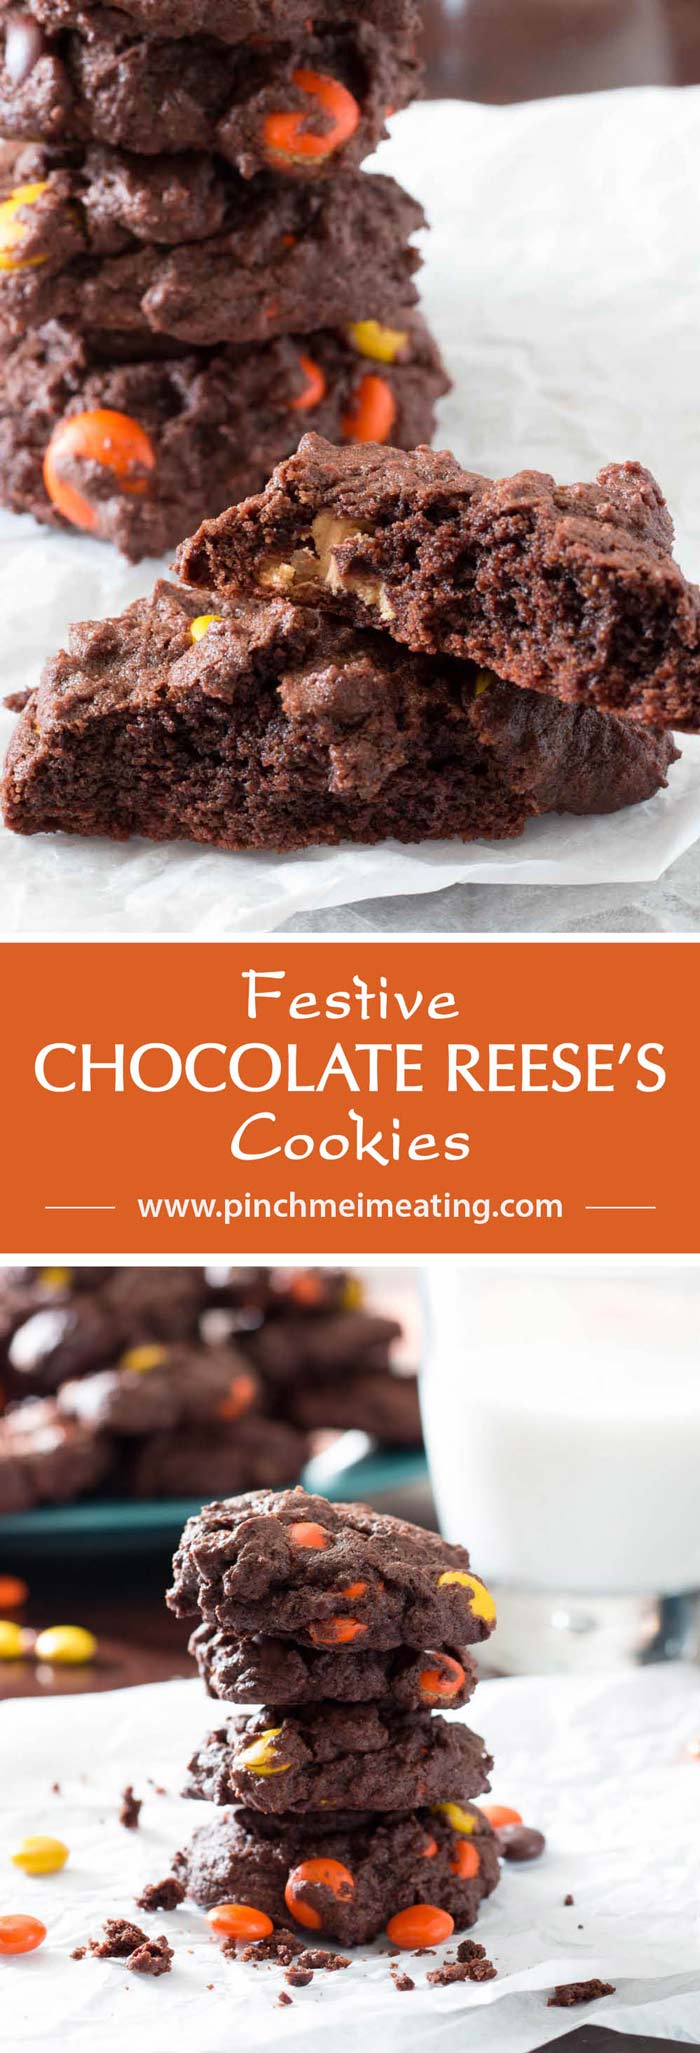 Chocolate Reese's cookies are cakey, brownie-like treats that are packed with peanut butter morsels and stay soft for days! With a rich brown chocolate cookie and orange and yellow Reese's Pieces, these cookies are full of fall colors and are perfect for autumn holidays!